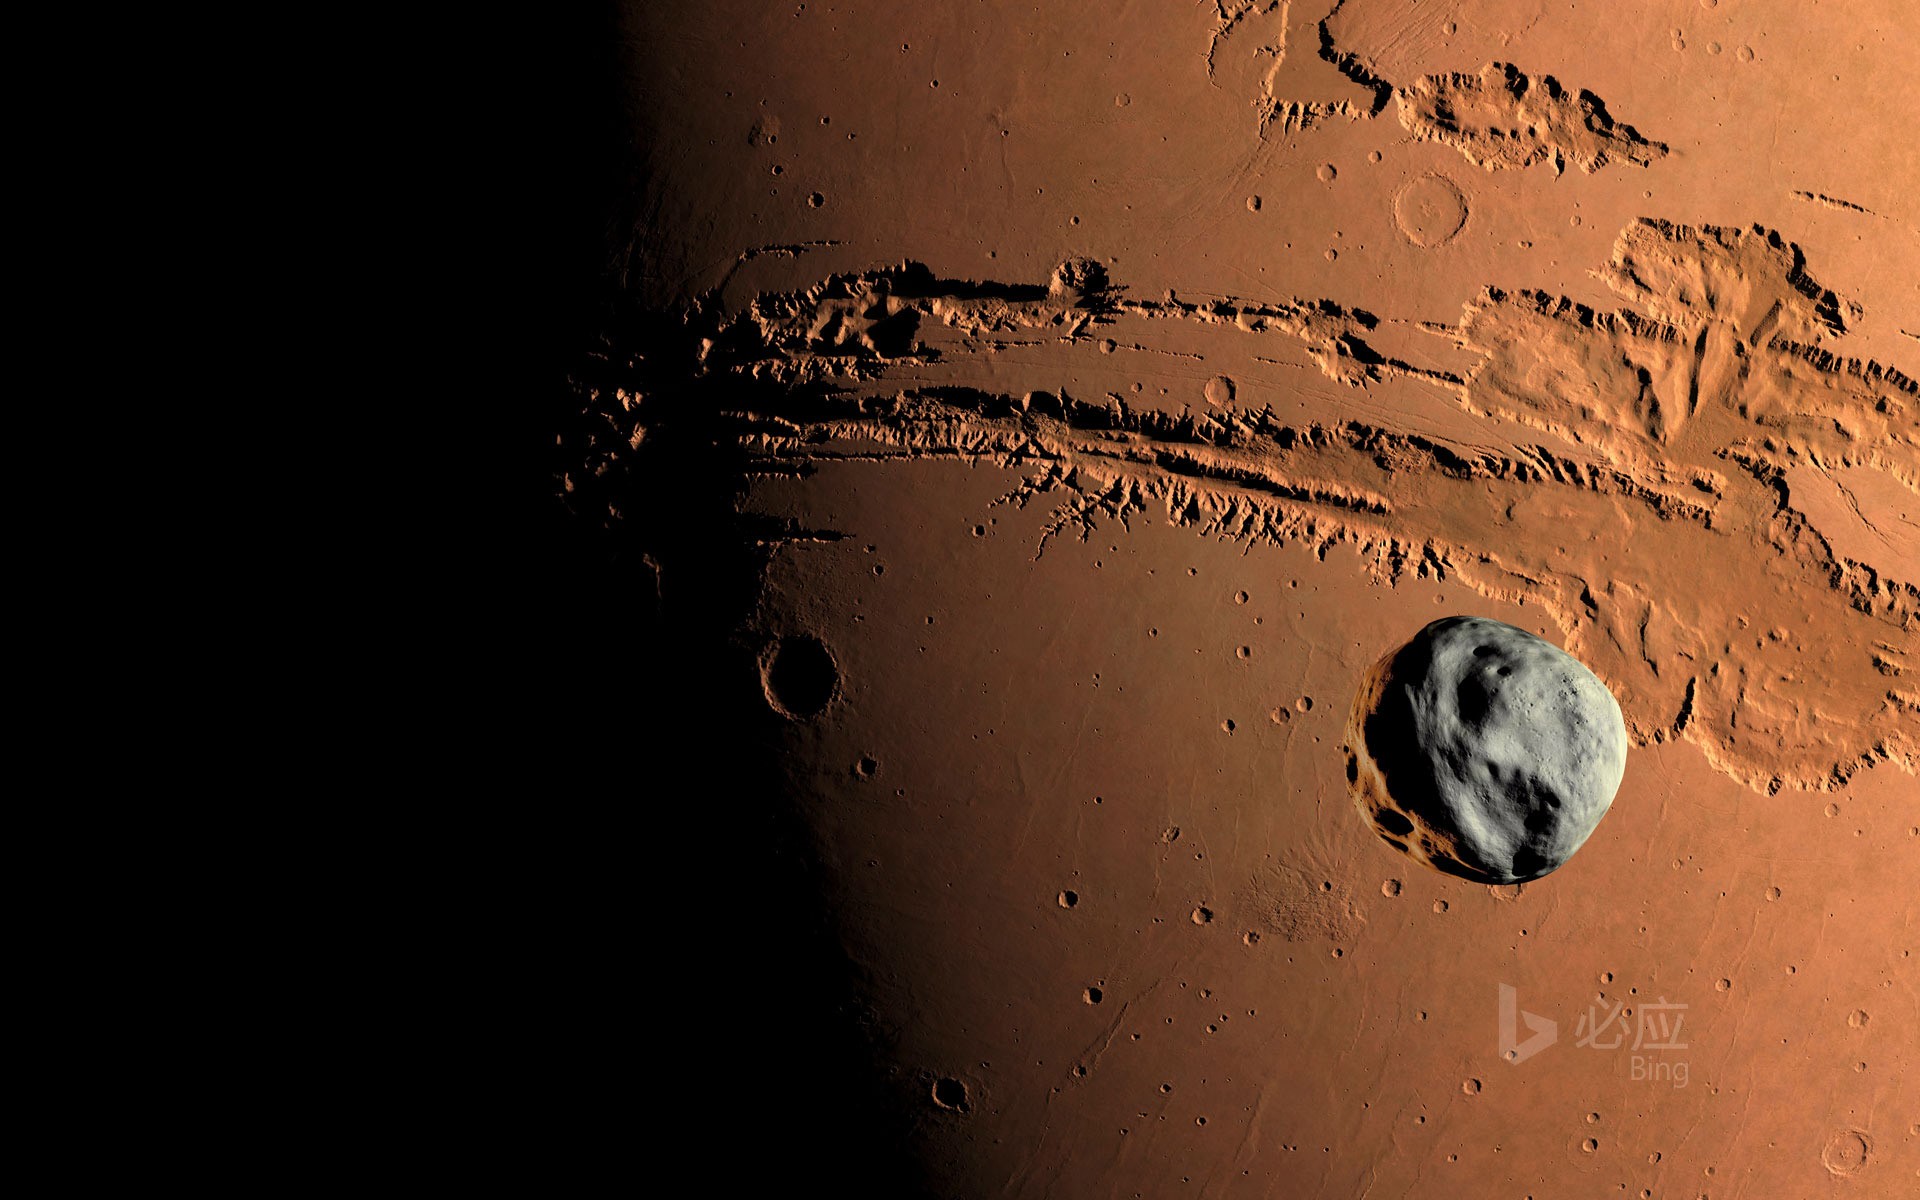 Canyon System on Mars-Asteroids on the Mariner Canyon Area